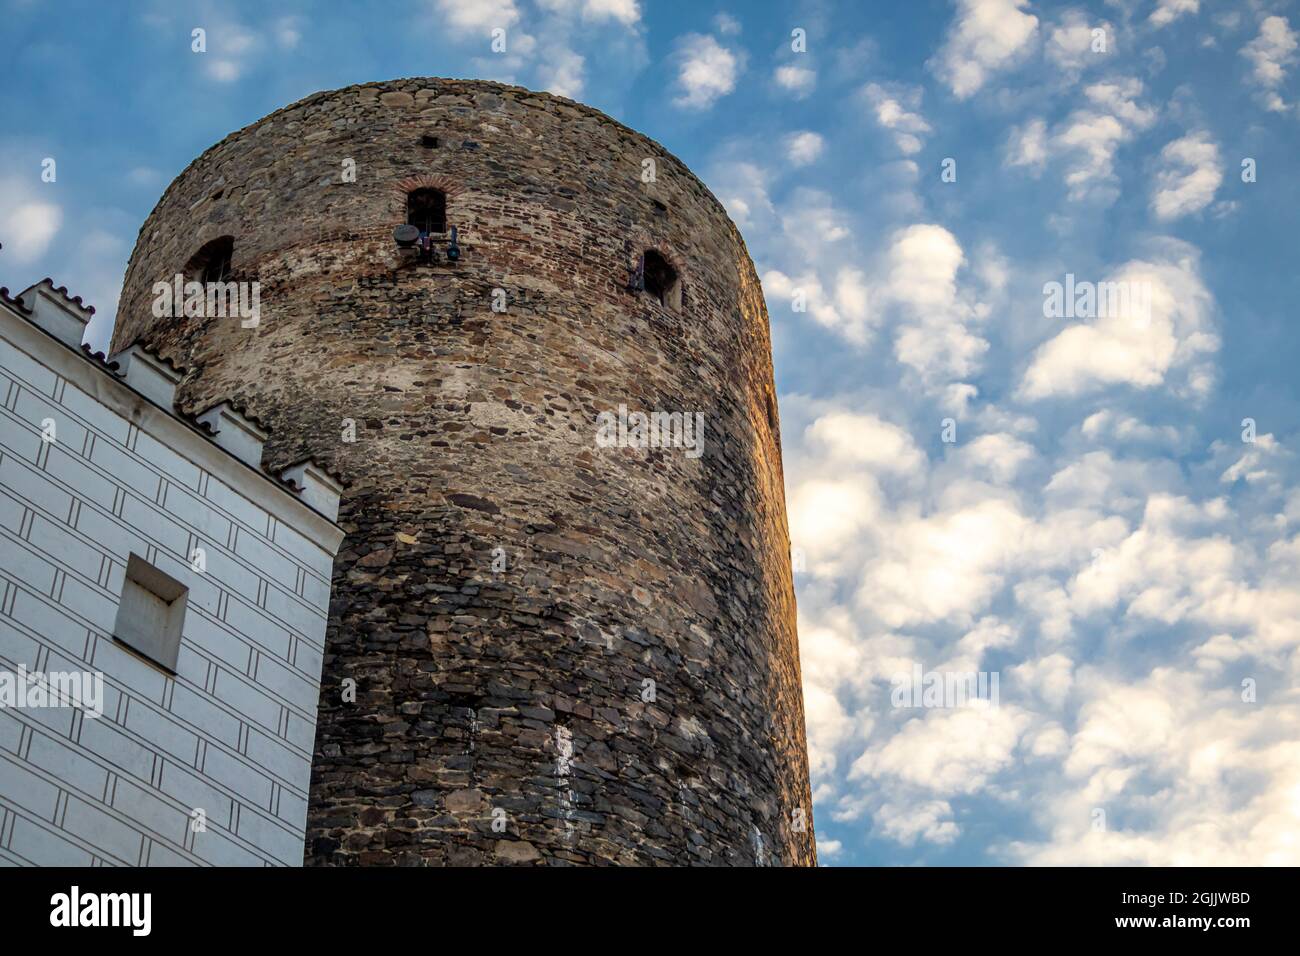 View up to an old brick fortified tower and house with white facade in front of blue sky with white clouds in evening light Stock Photo